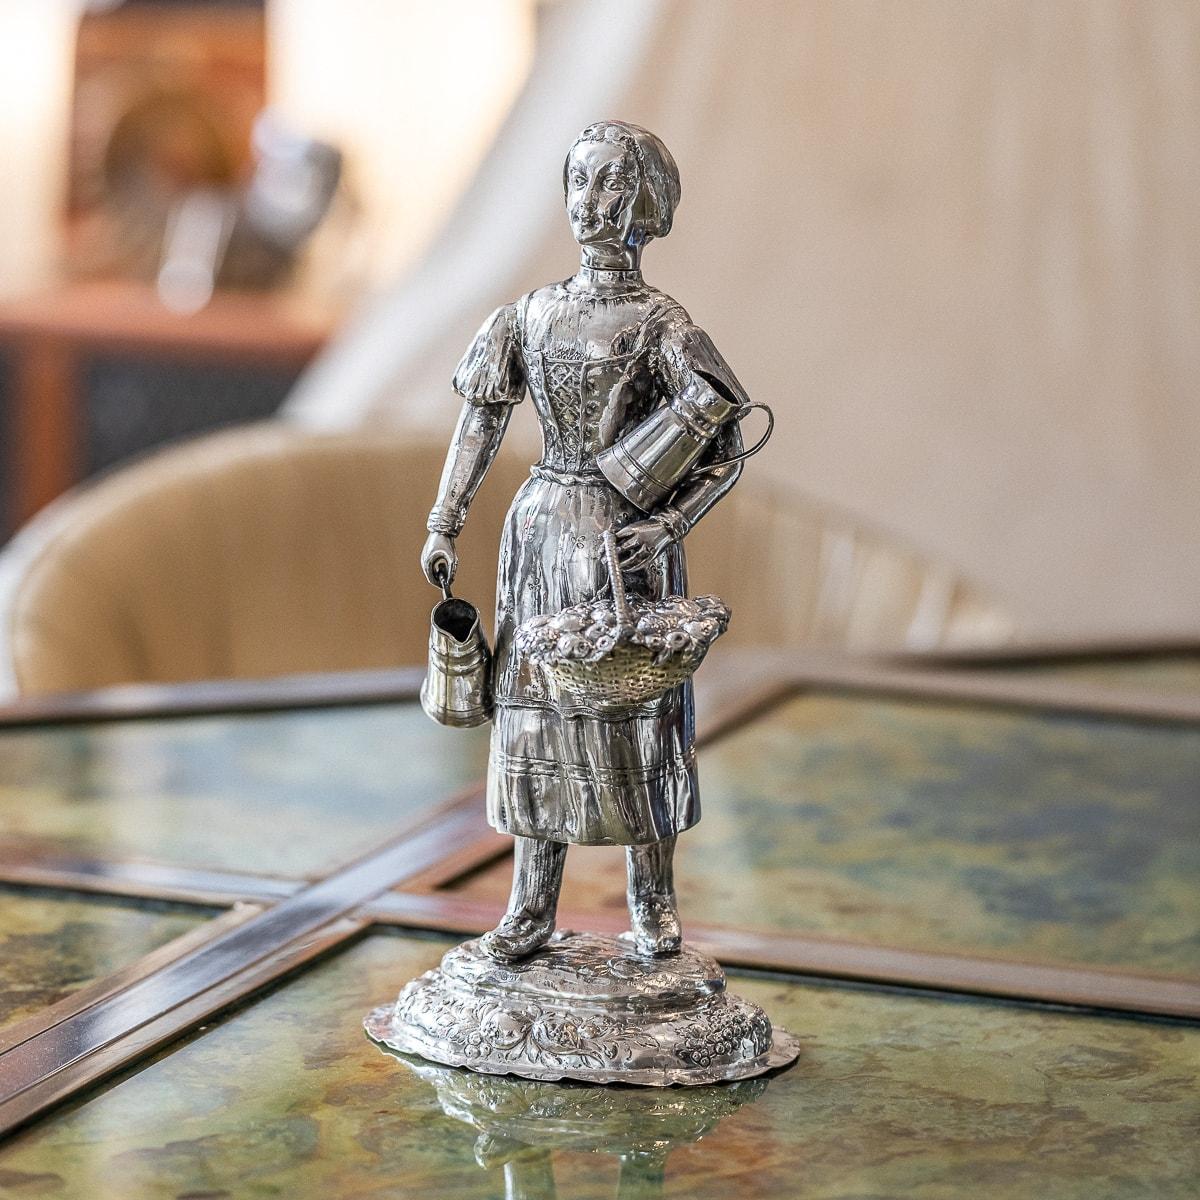 Antique 19th Century German solid silver figural table ornament modelled as a female fruit seller, standing on a large shaped-oval base embossed with flowers, right hand holding a water pitcher and one resting on the left, the left hand holding a